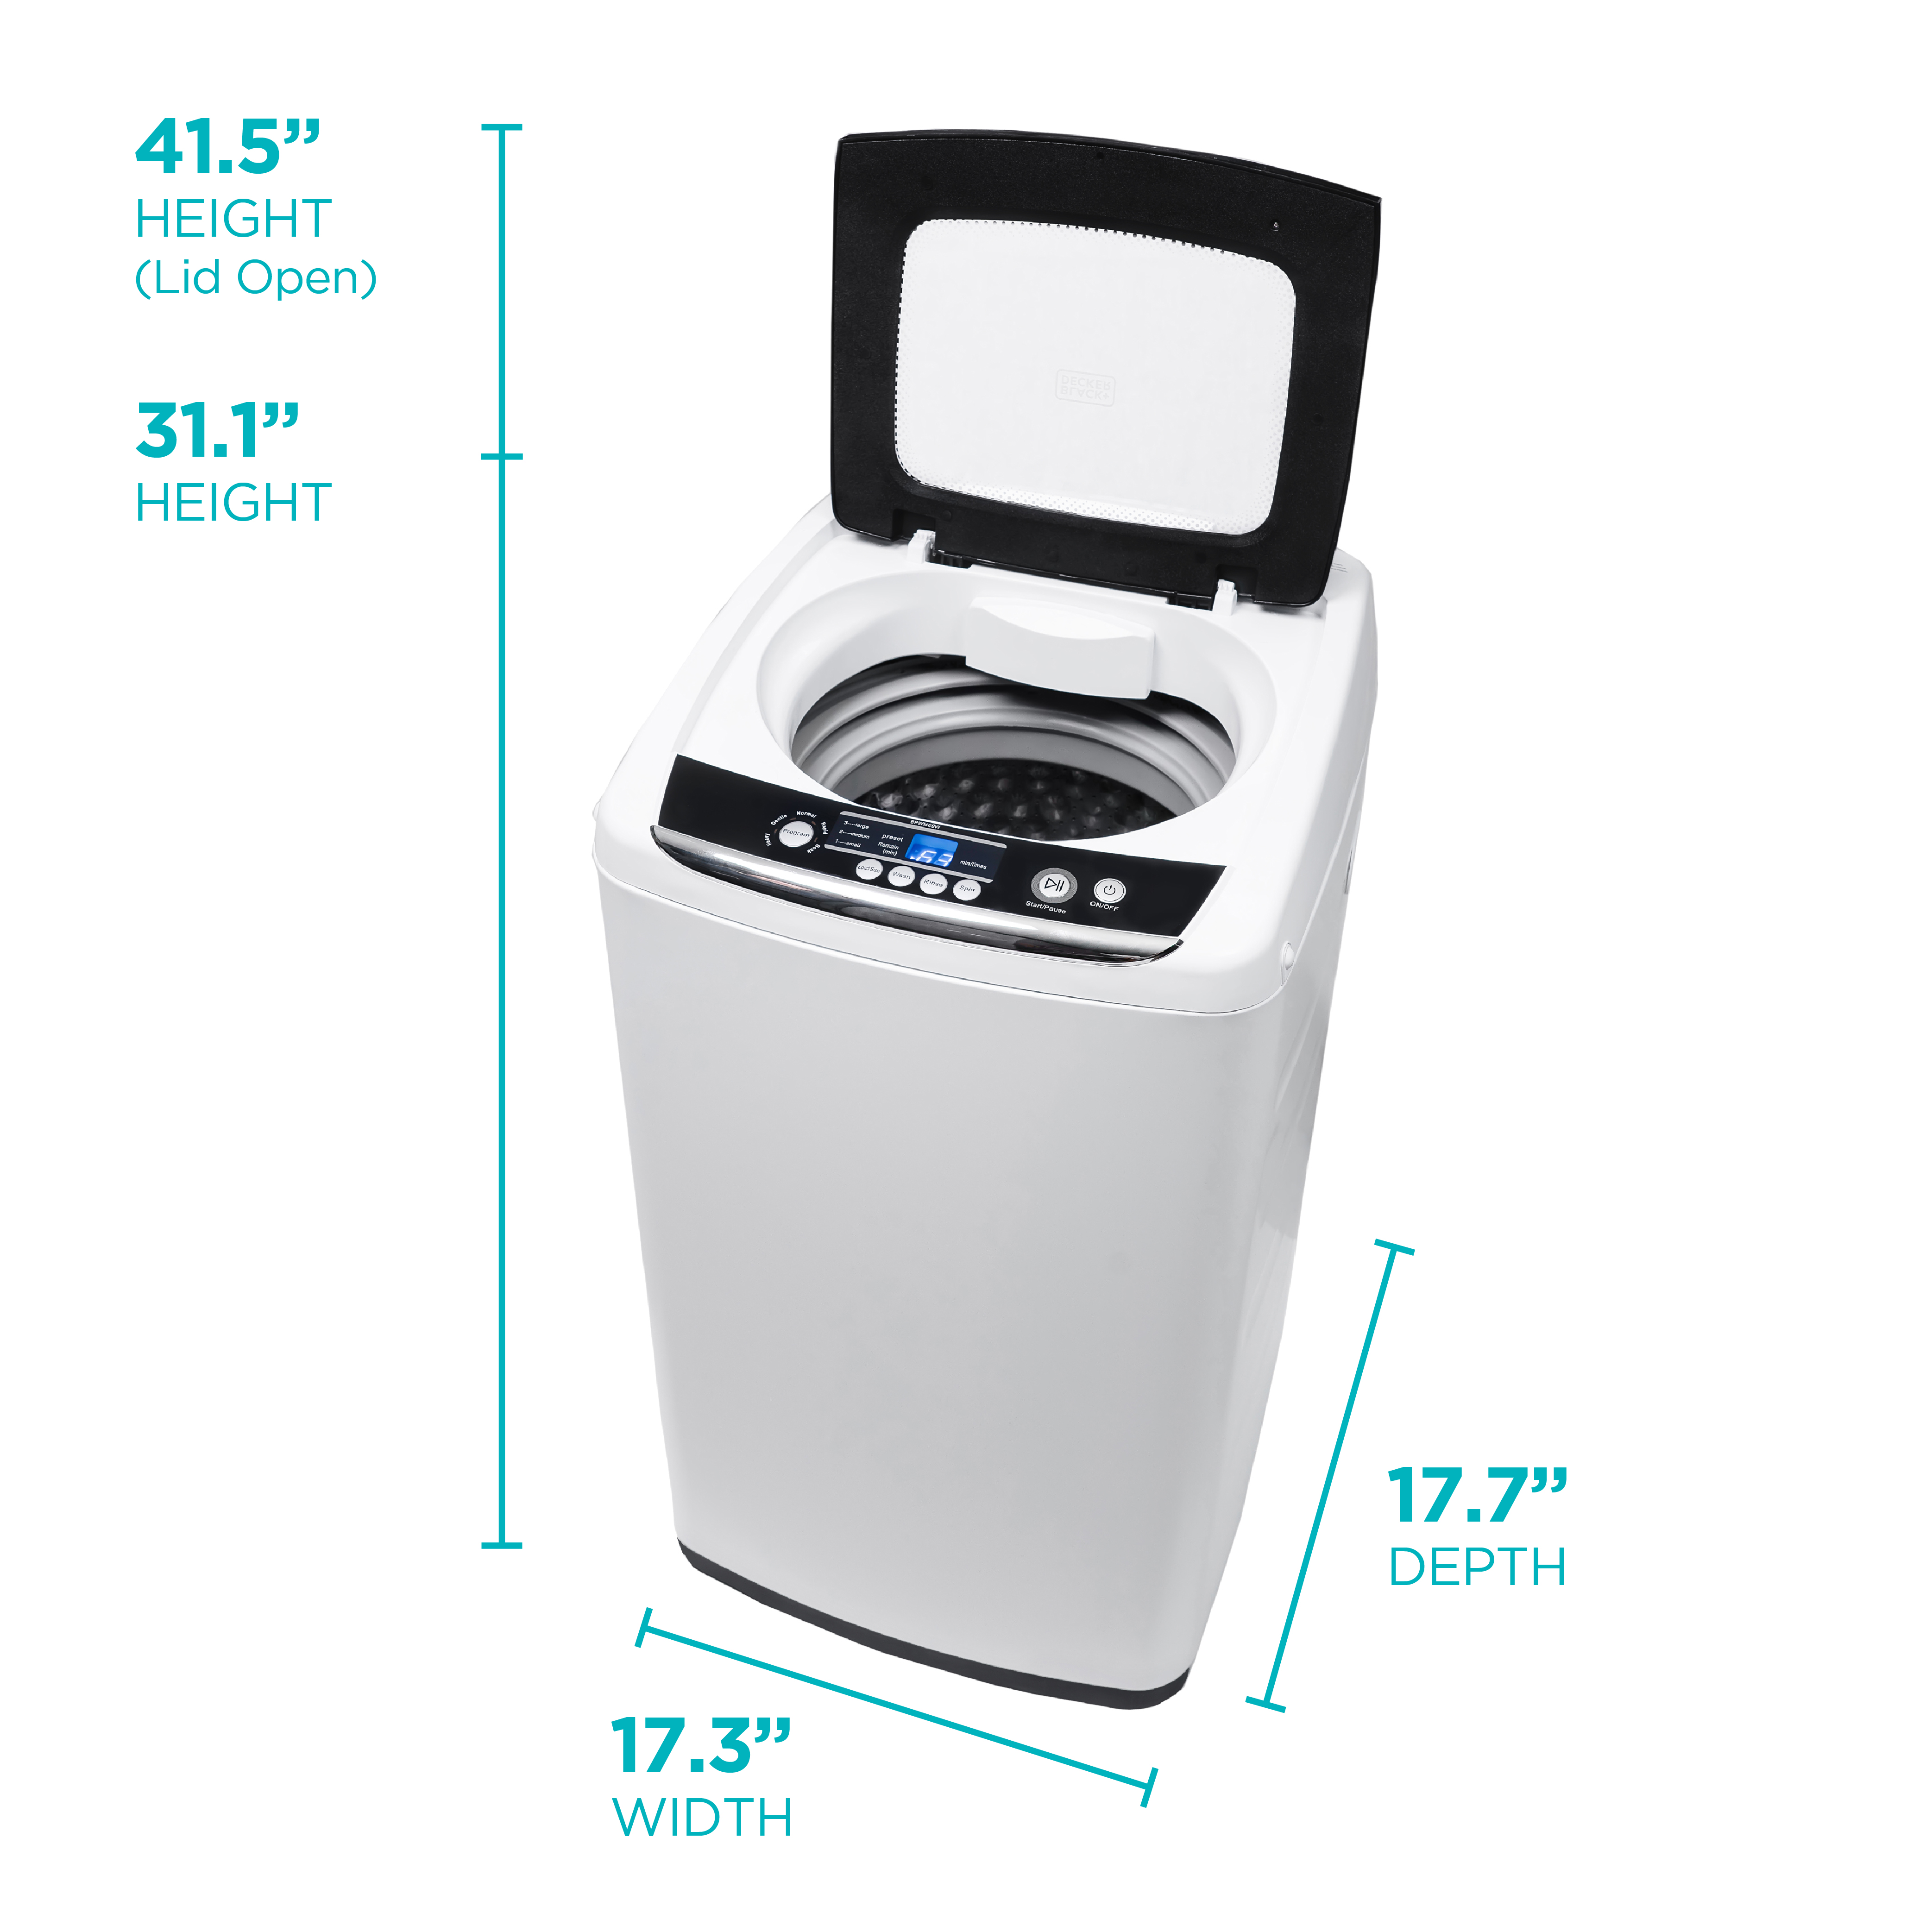 Black+Decker BPWM09W Washer - 5 Mode(s) - Top Loading - 0.90 ft³ Washer Capacity - Cold Water Supply - image 4 of 7